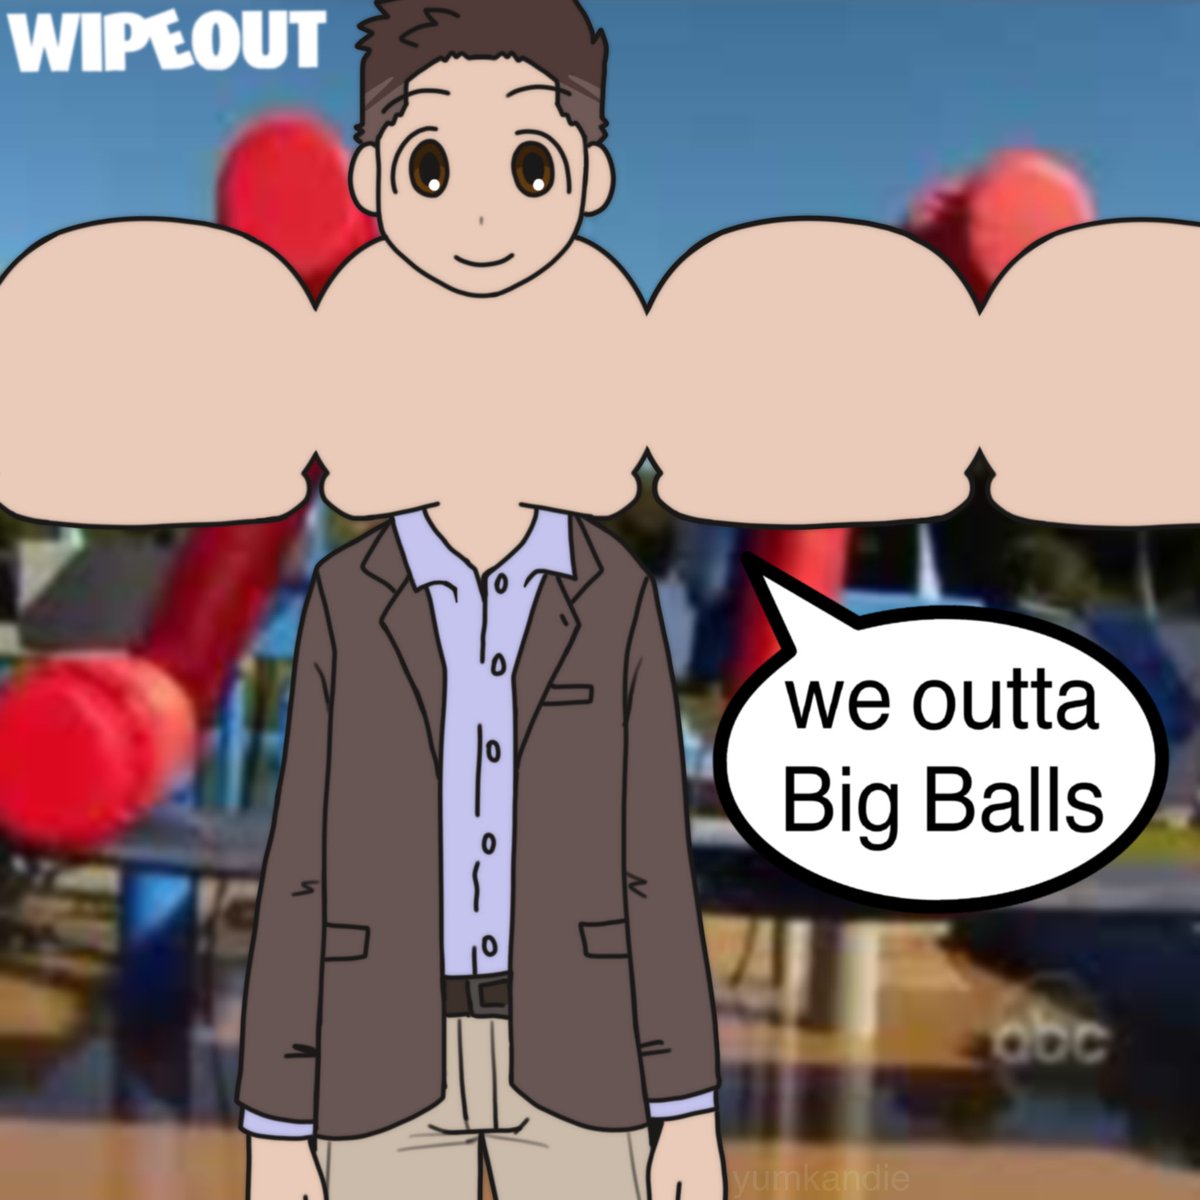 we outta Big Balls Wipeout (TV Series 2008-2014)